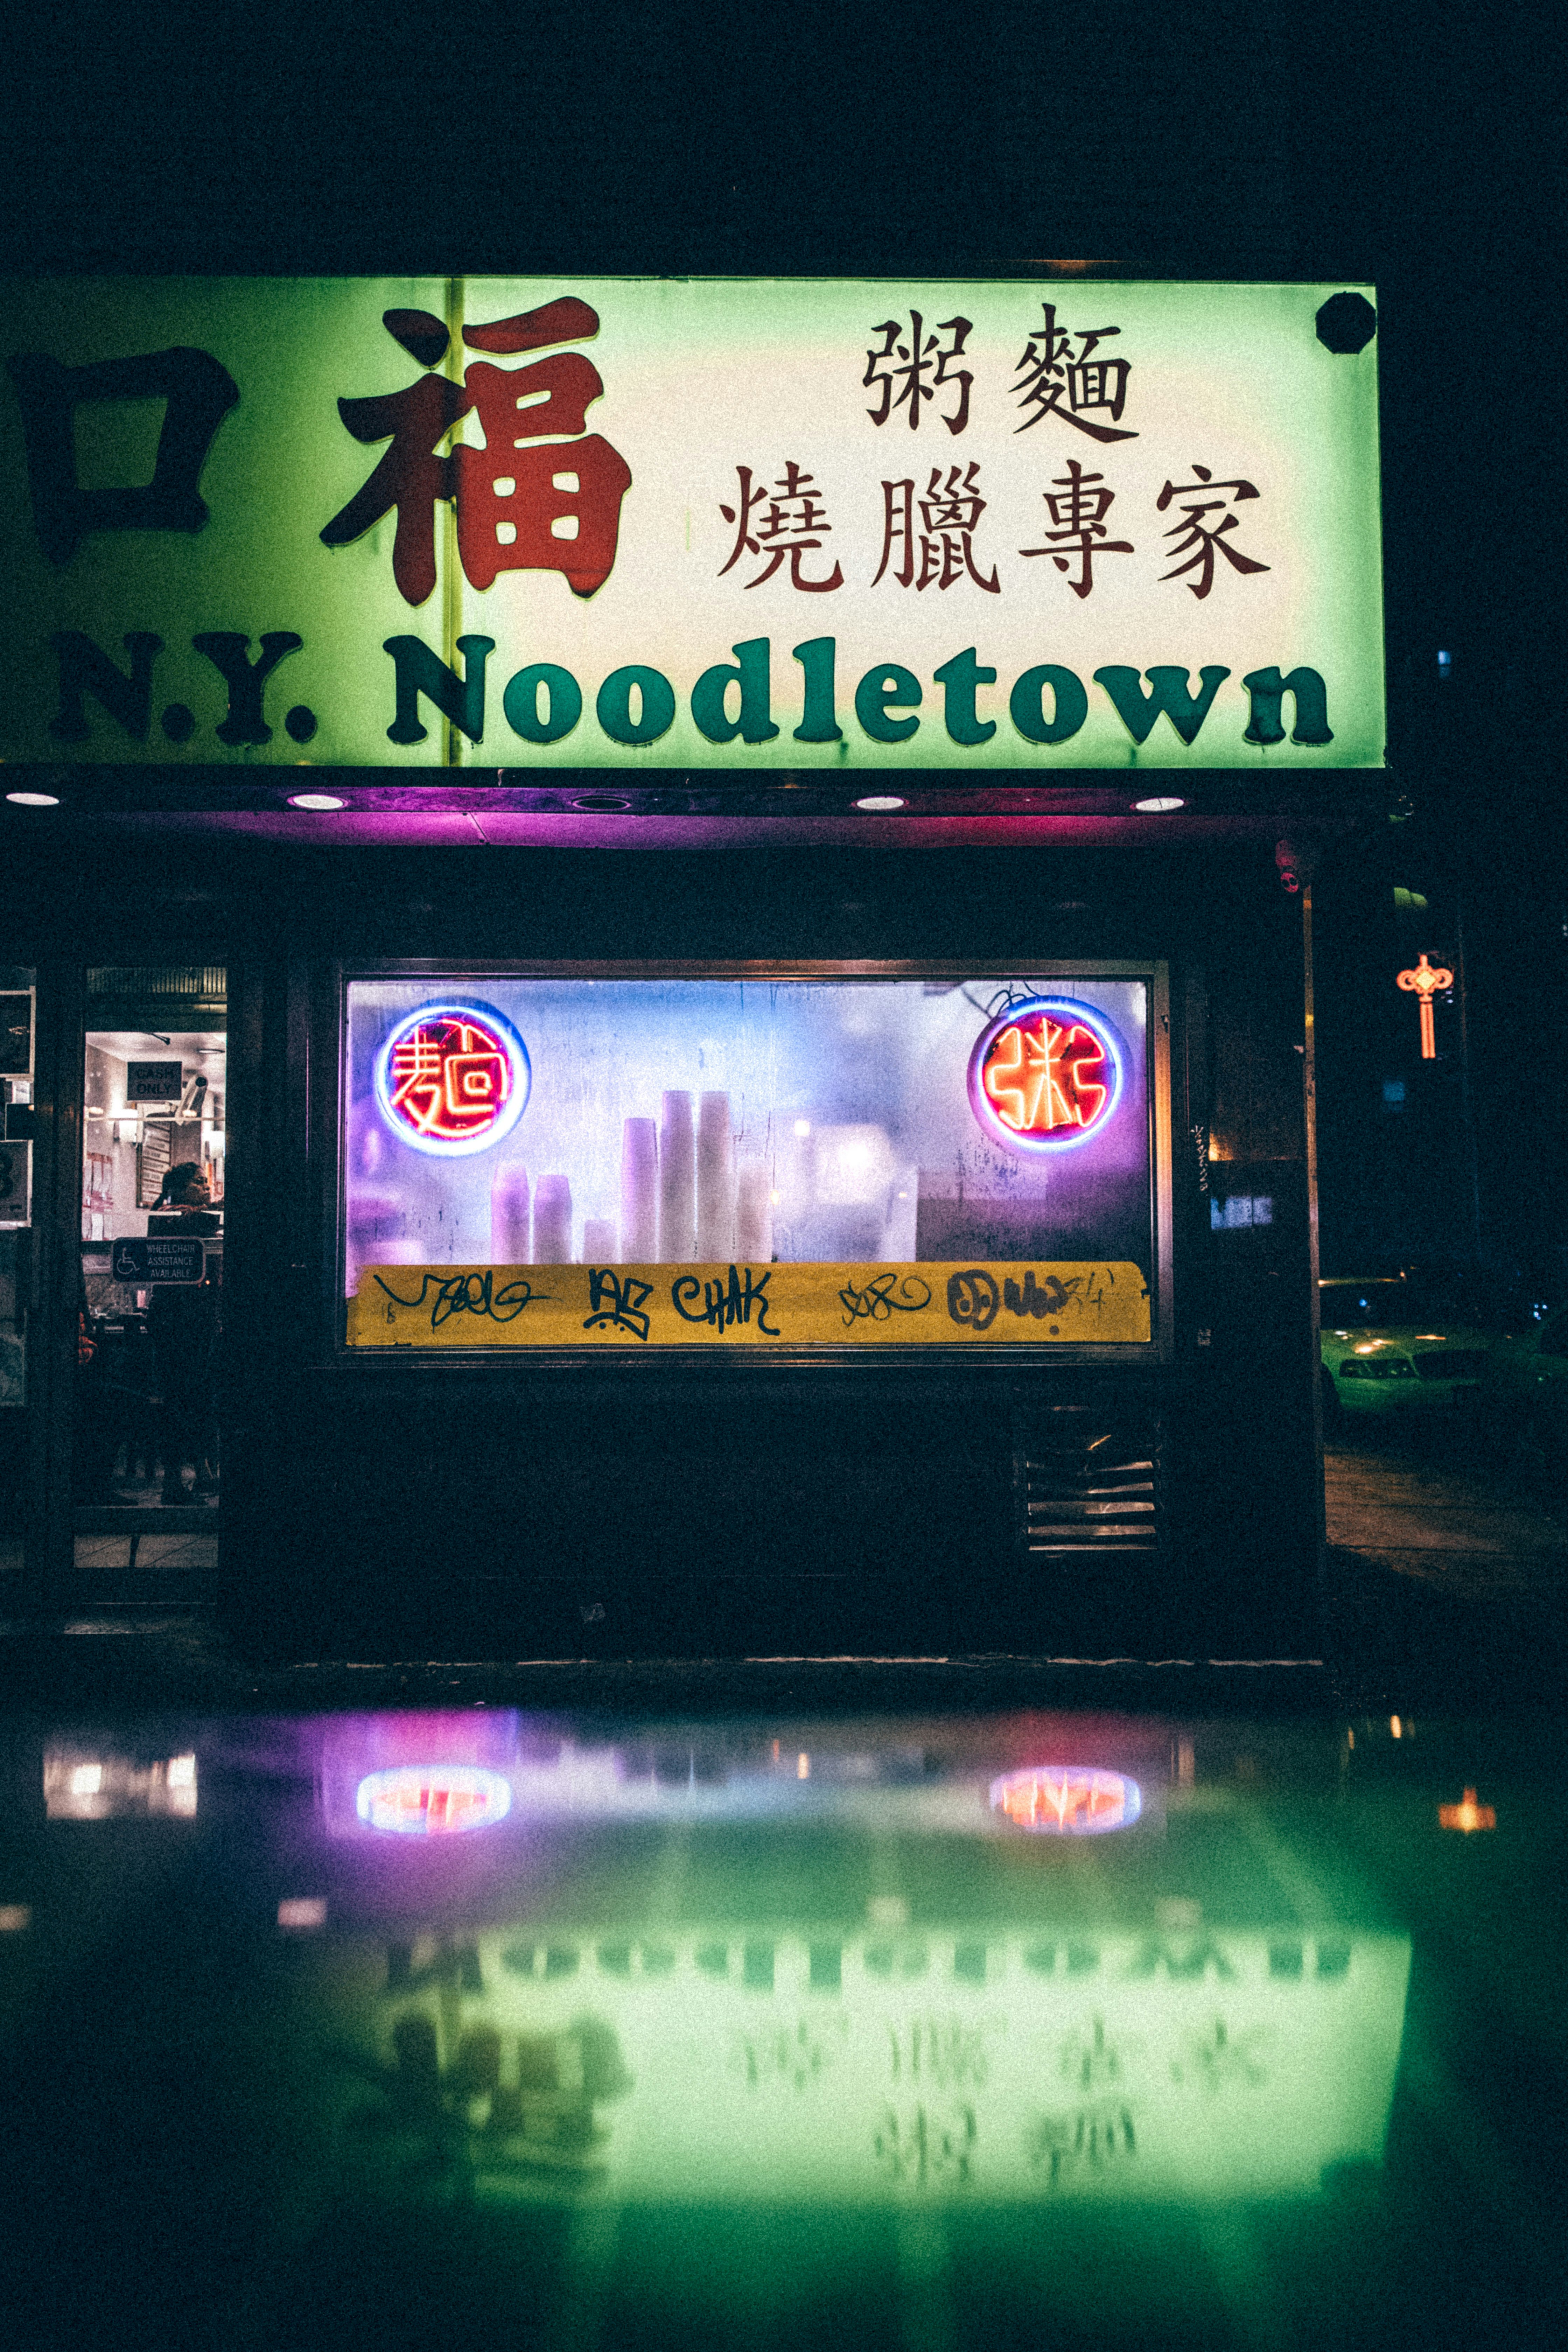 NY Noodletown building with signage at night time